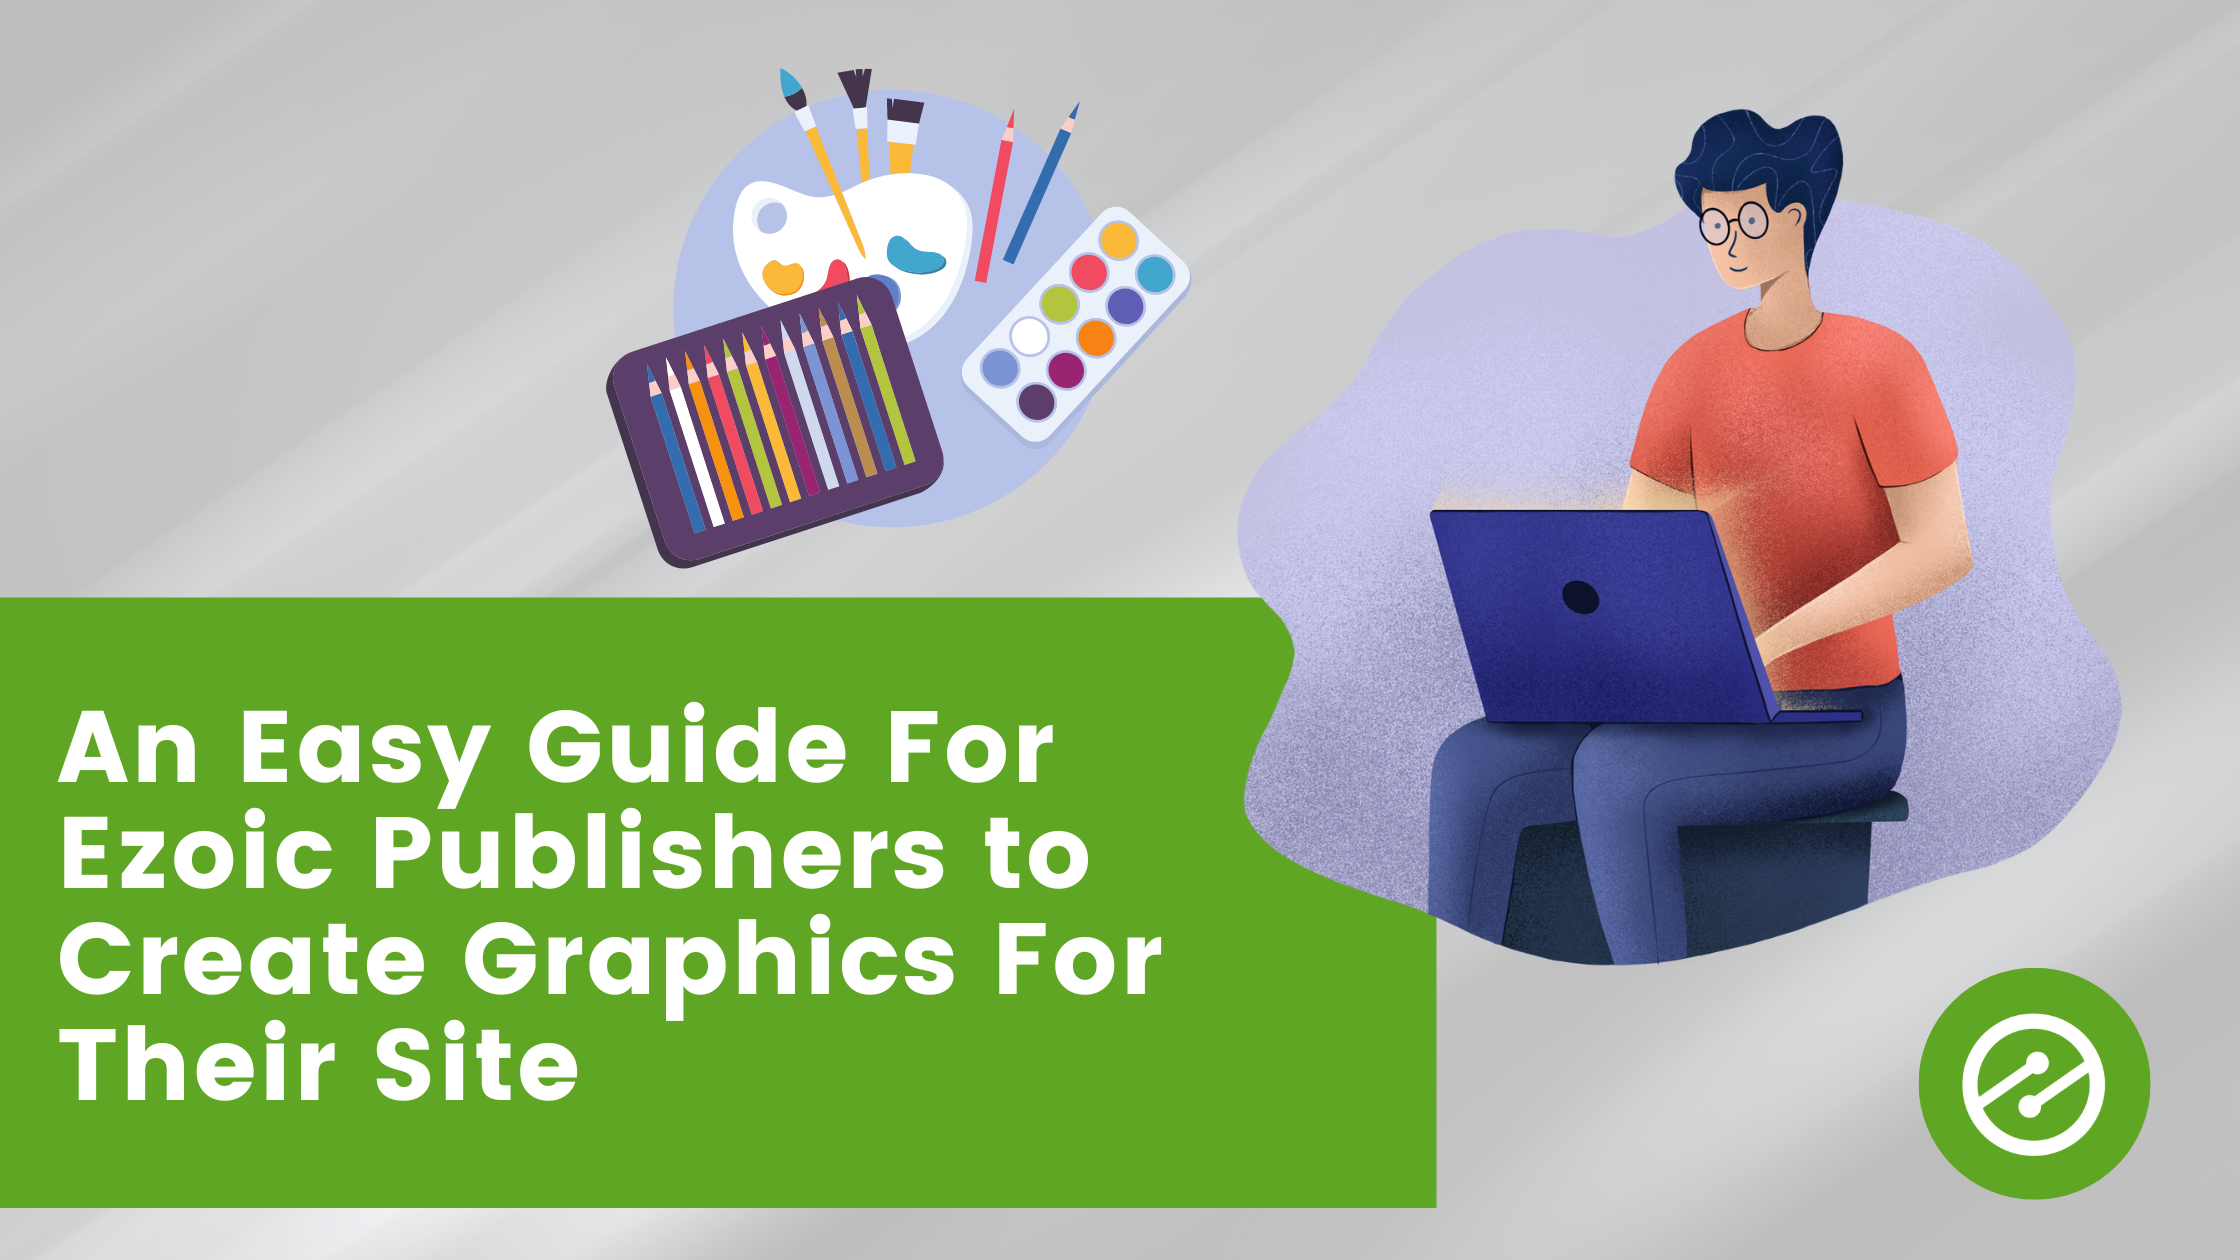 Create Graphics For Your Site With This Easy Guide